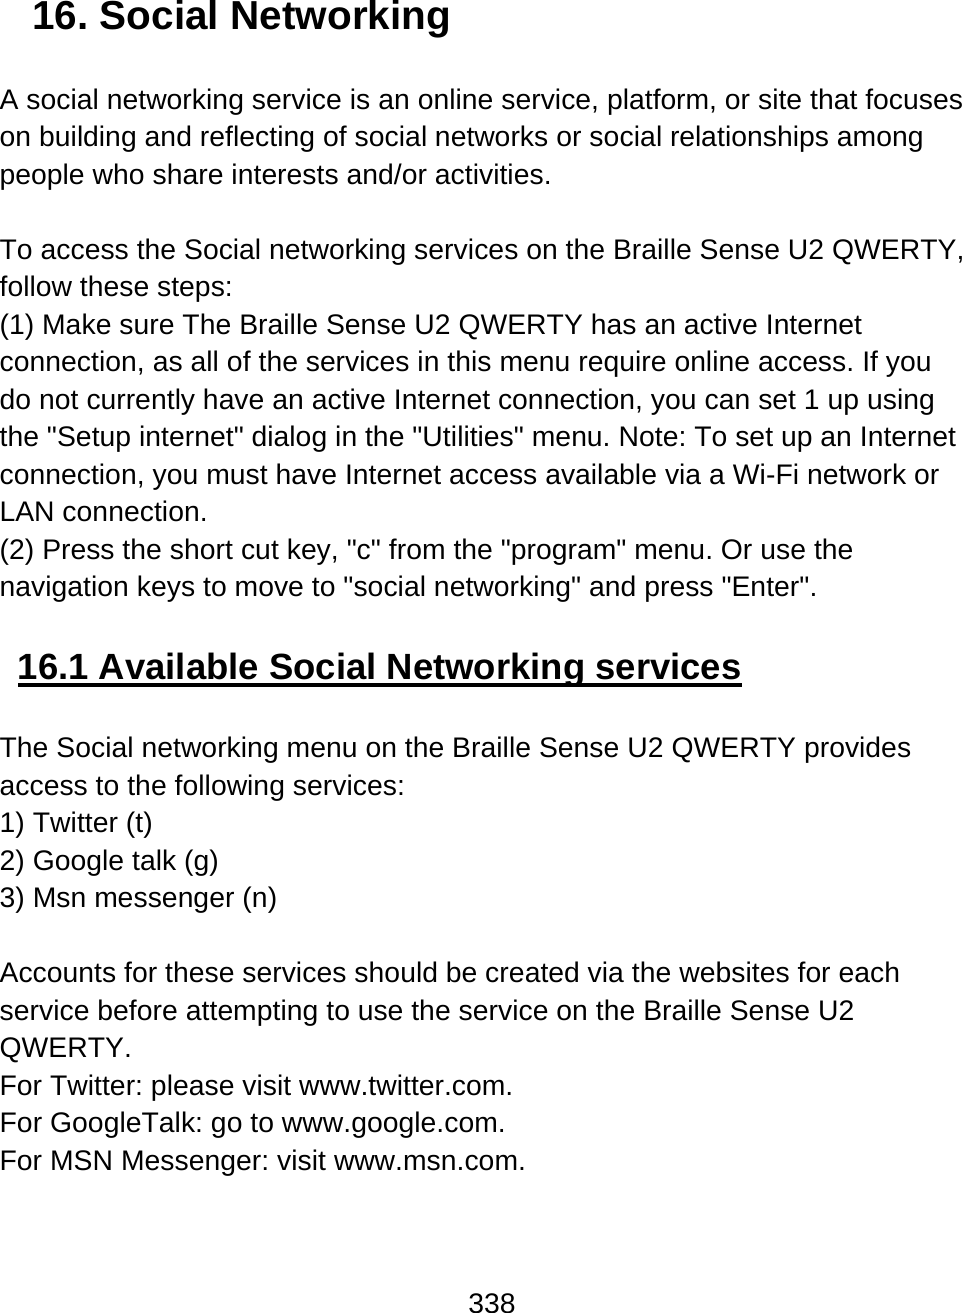 338  16. Social Networking  A social networking service is an online service, platform, or site that focuses on building and reflecting of social networks or social relationships among people who share interests and/or activities.   To access the Social networking services on the Braille Sense U2 QWERTY, follow these steps: (1) Make sure The Braille Sense U2 QWERTY has an active Internet connection, as all of the services in this menu require online access. If you do not currently have an active Internet connection, you can set 1 up using the &quot;Setup internet&quot; dialog in the &quot;Utilities&quot; menu. Note: To set up an Internet connection, you must have Internet access available via a Wi-Fi network or LAN connection.  (2) Press the short cut key, &quot;c&quot; from the &quot;program&quot; menu. Or use the navigation keys to move to &quot;social networking&quot; and press &quot;Enter&quot;.   16.1 Available Social Networking services  The Social networking menu on the Braille Sense U2 QWERTY provides access to the following services: 1) Twitter (t) 2) Google talk (g) 3) Msn messenger (n)  Accounts for these services should be created via the websites for each service before attempting to use the service on the Braille Sense U2 QWERTY.  For Twitter: please visit www.twitter.com. For GoogleTalk: go to www.google.com. For MSN Messenger: visit www.msn.com.   